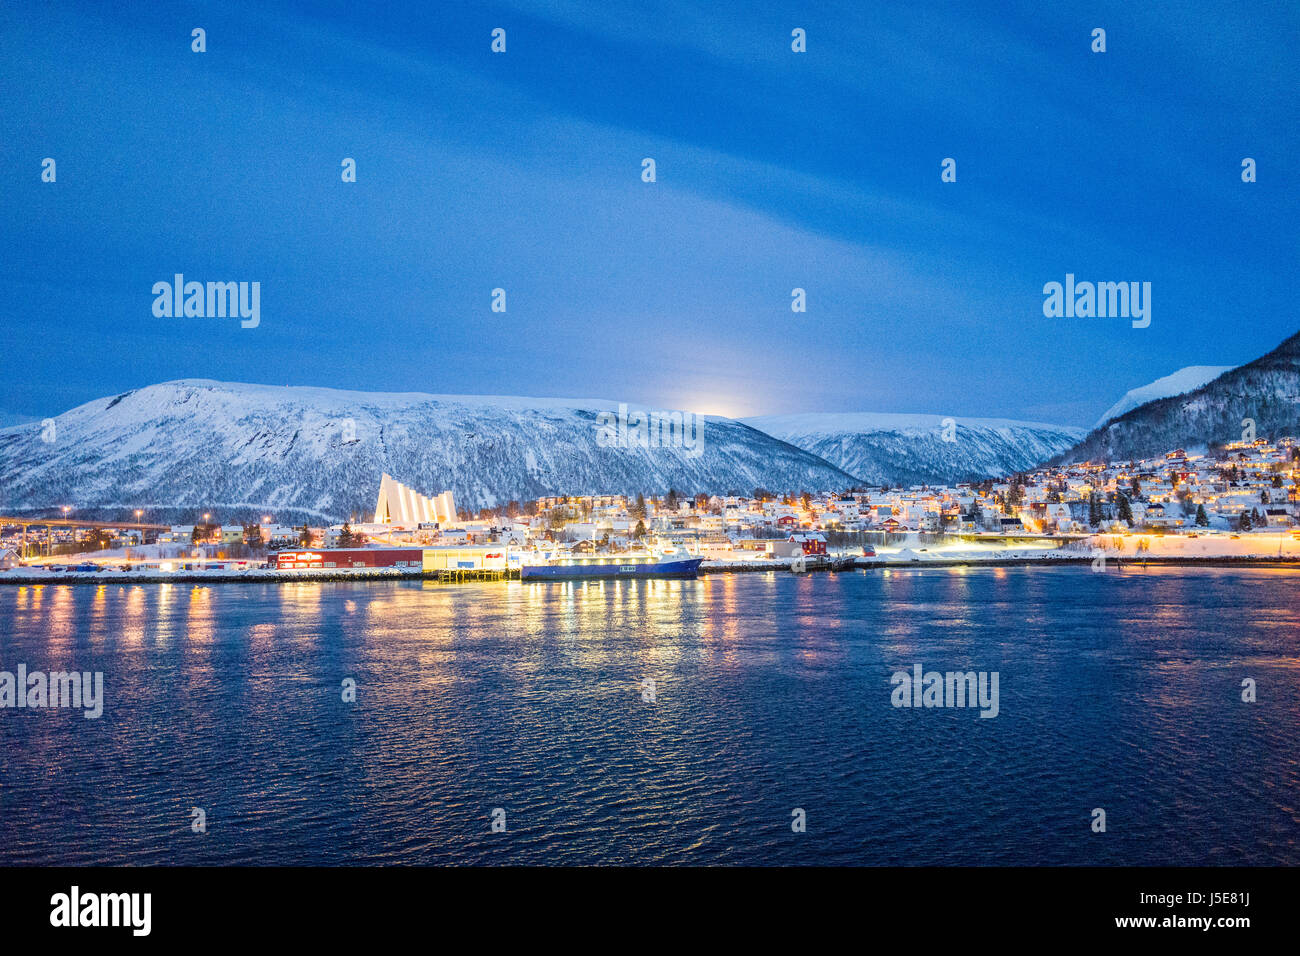 View towards the mainland area of Tromsdalen and the Arctic Cathedral, from the city center area of Tromsø, Norway, on the island of Tromsøya. Stock Photo